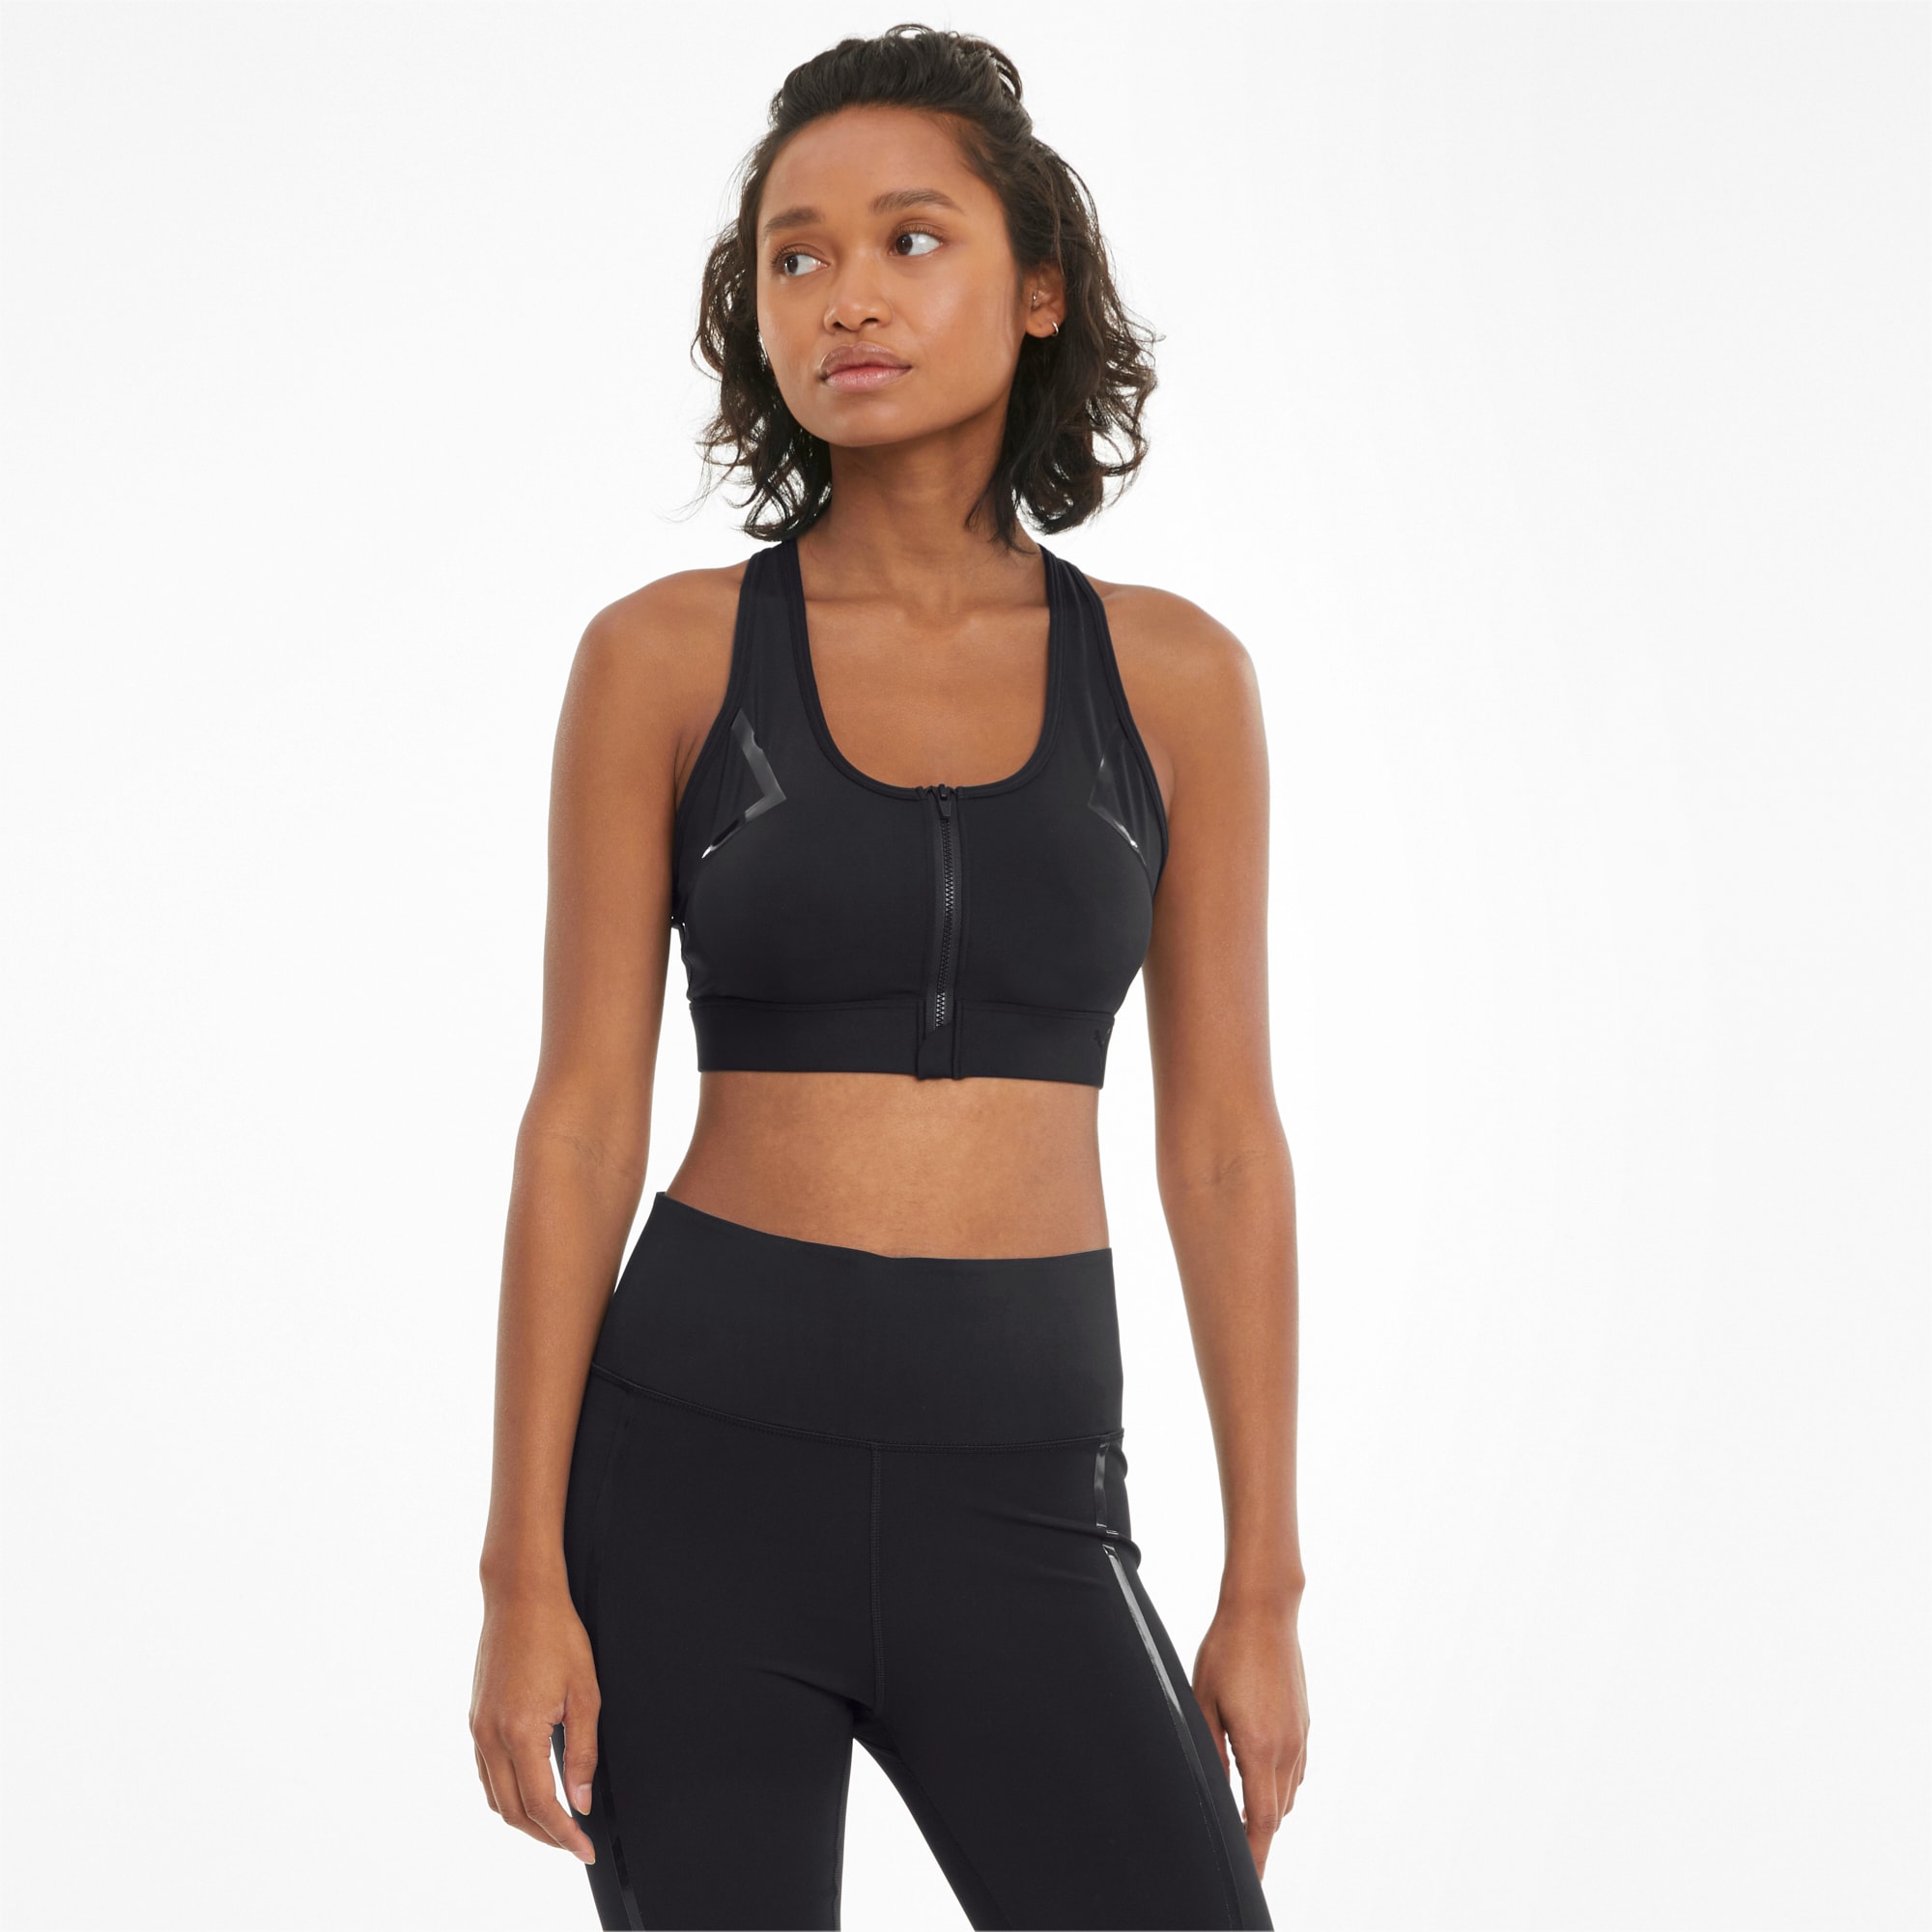 Caramelcc Womens High Impact Wirefree Front Zip Sports Bra